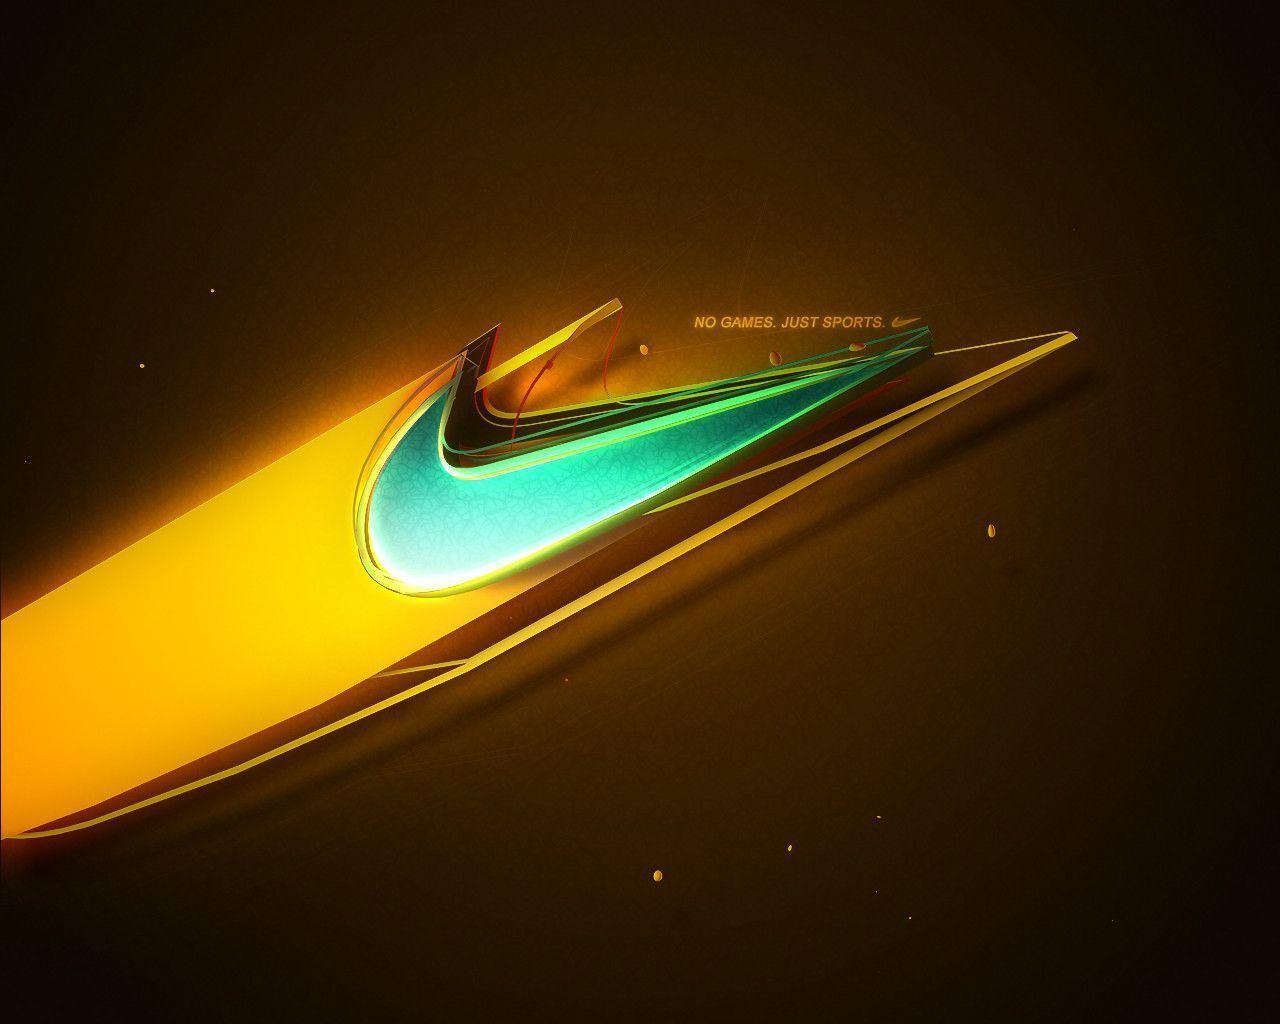 Excellent Nike Wallpaper 1280x1024PX Exciting Nike Wallpaper HD